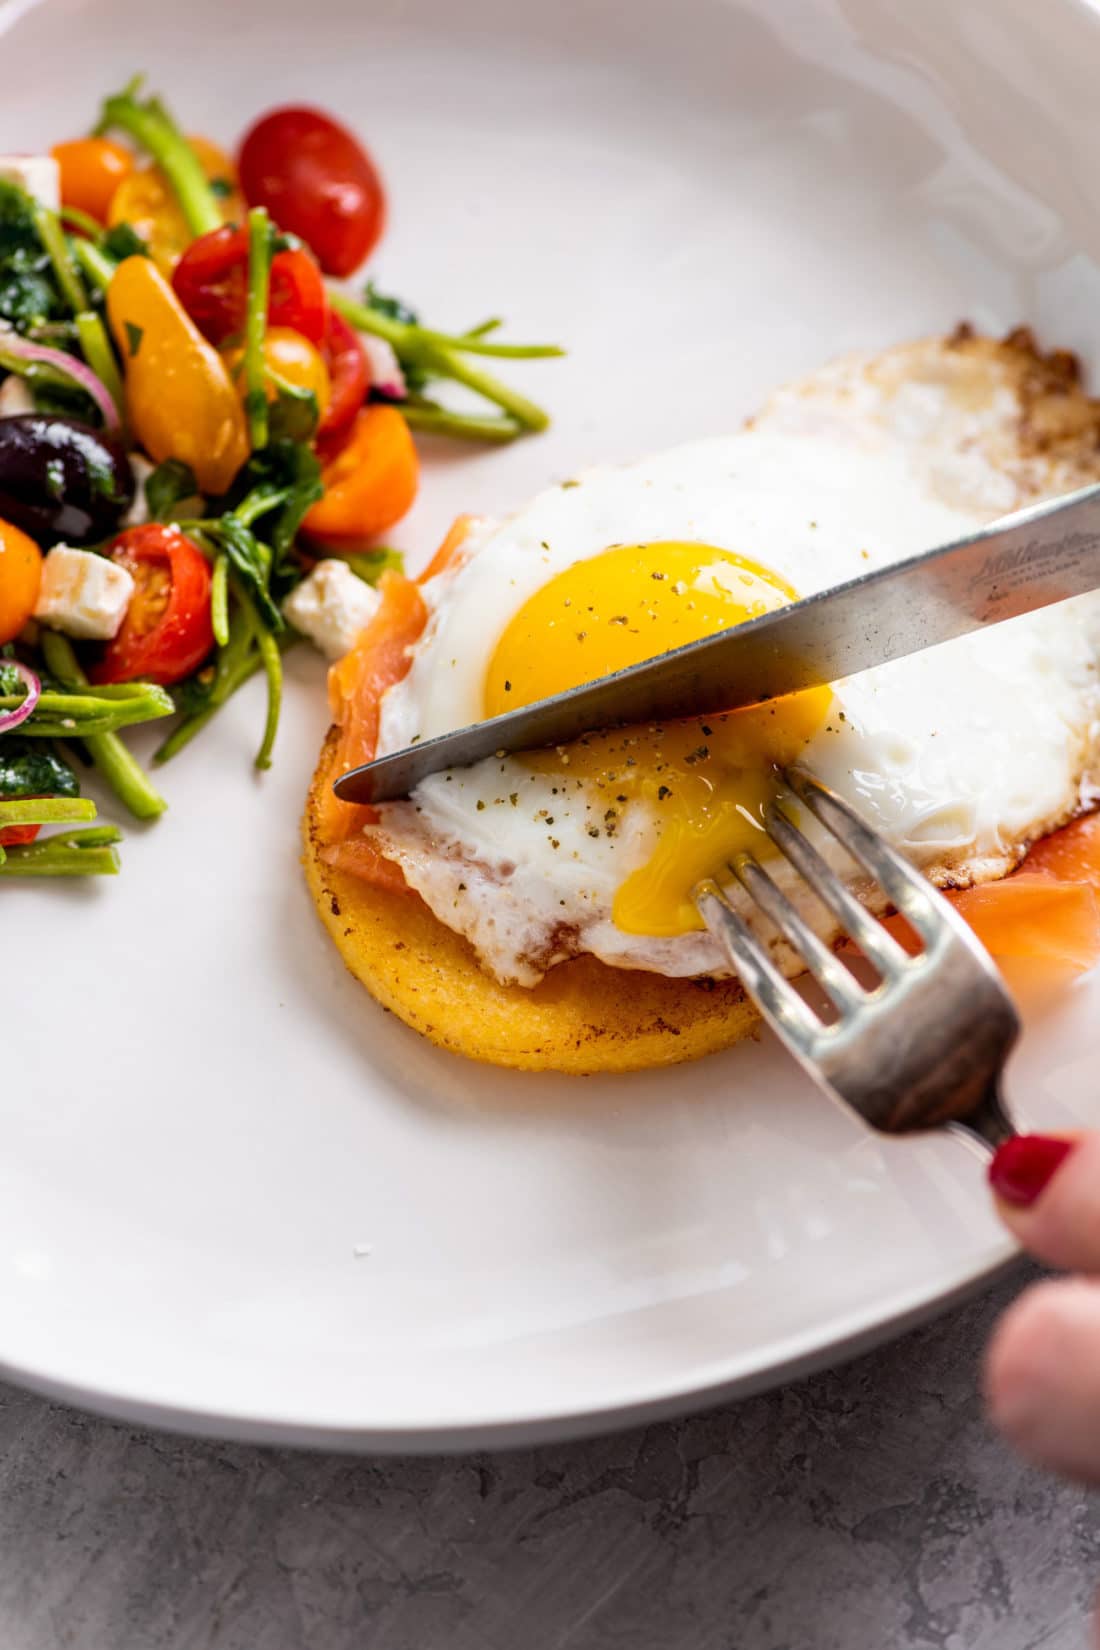 Fried Eggs and Smoked Salmon over Polenta Cakes